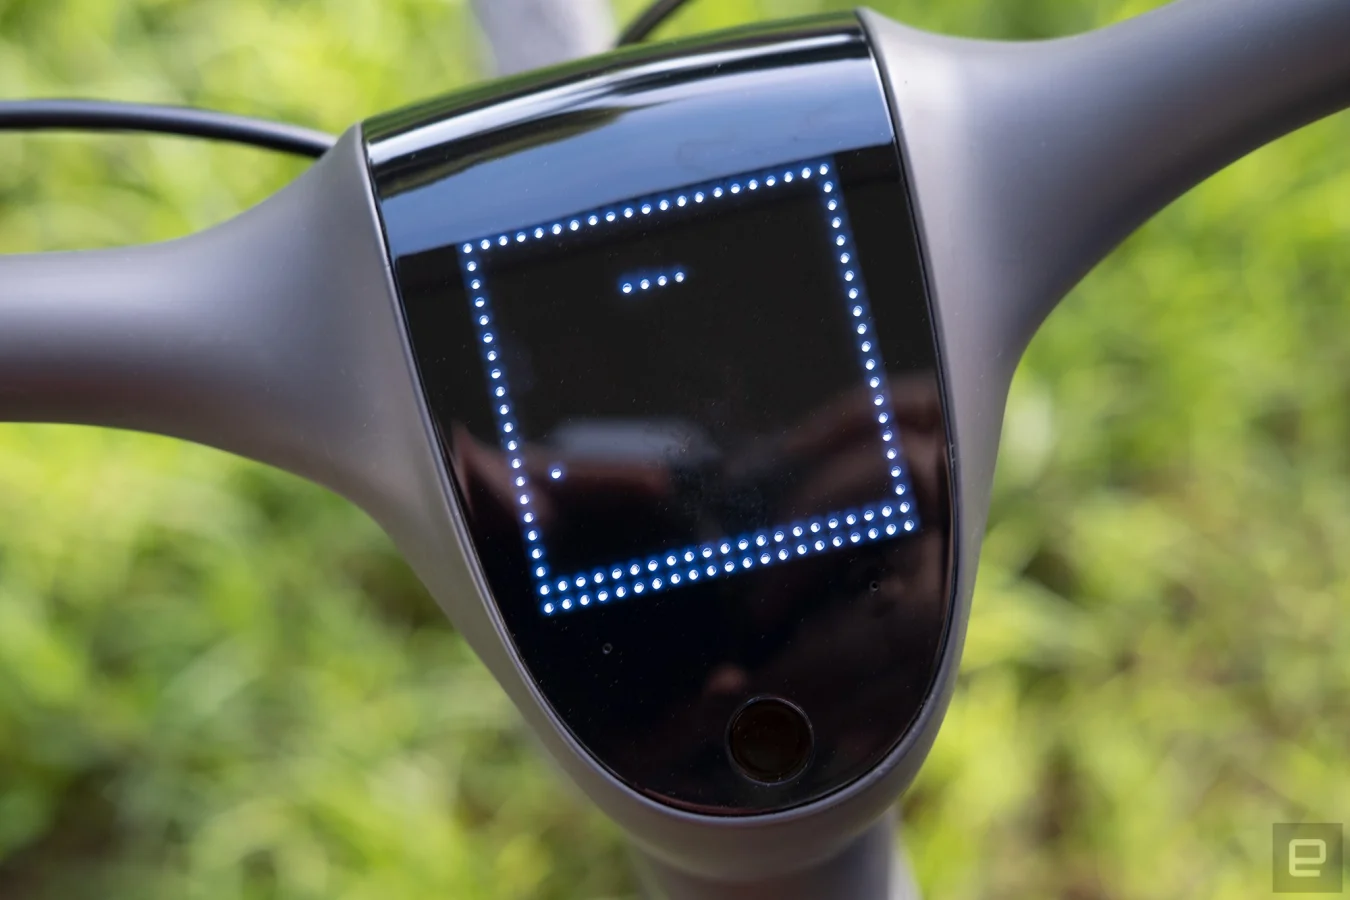 A game of the Nokia classic, Snake, is displayed on the Urtopia e-bike's built-in display.